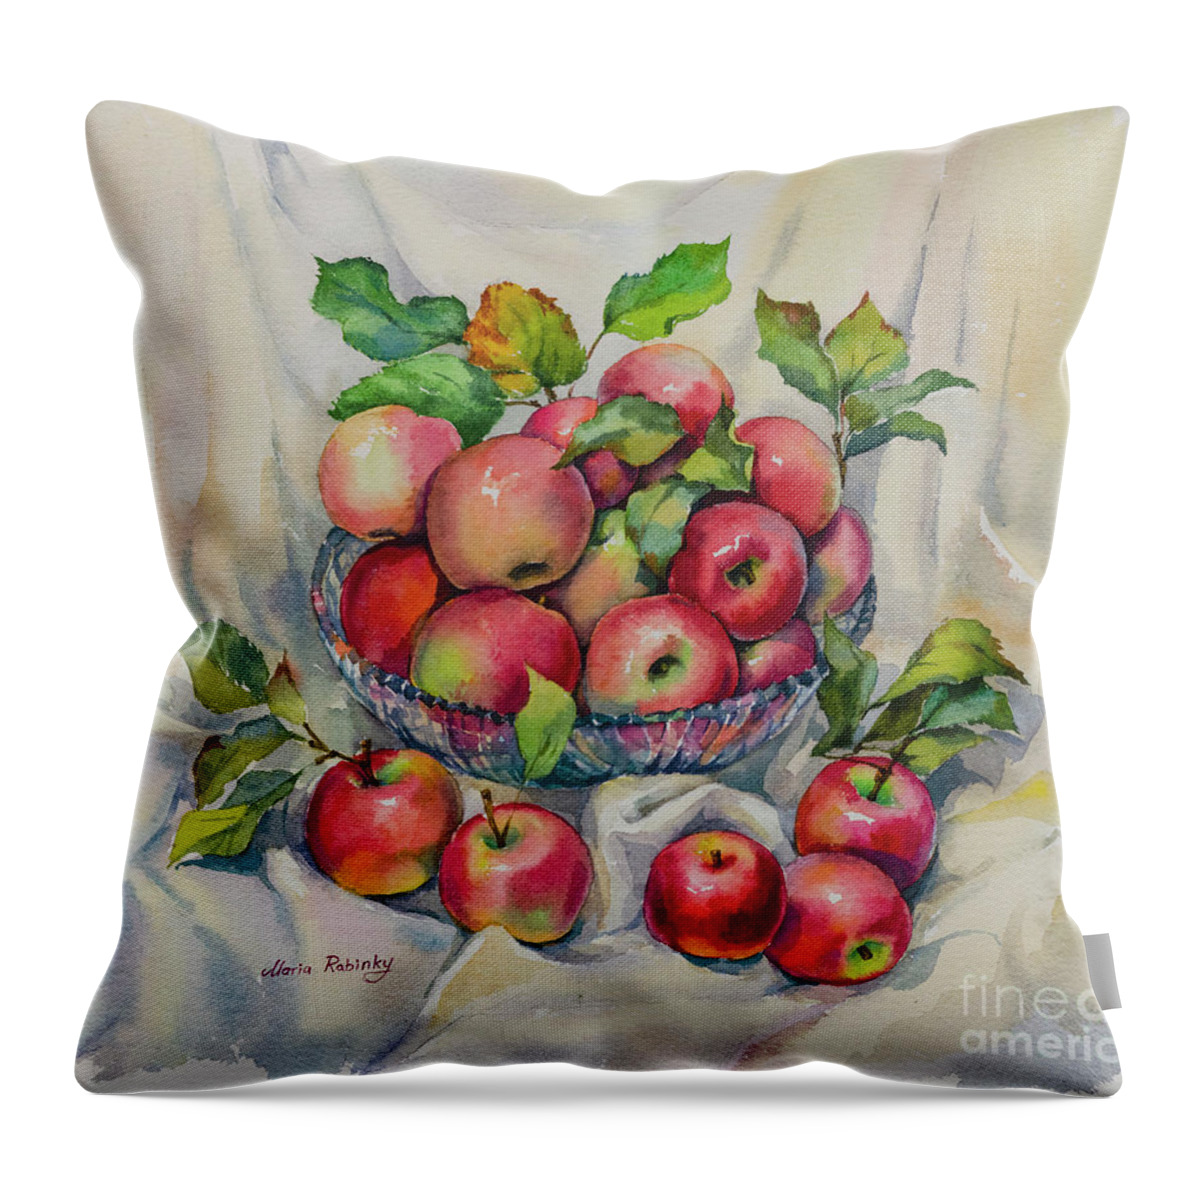 Pink Ladies Apples Throw Pillow featuring the digital art Pink Ladies Still Life by Maria Rabinky